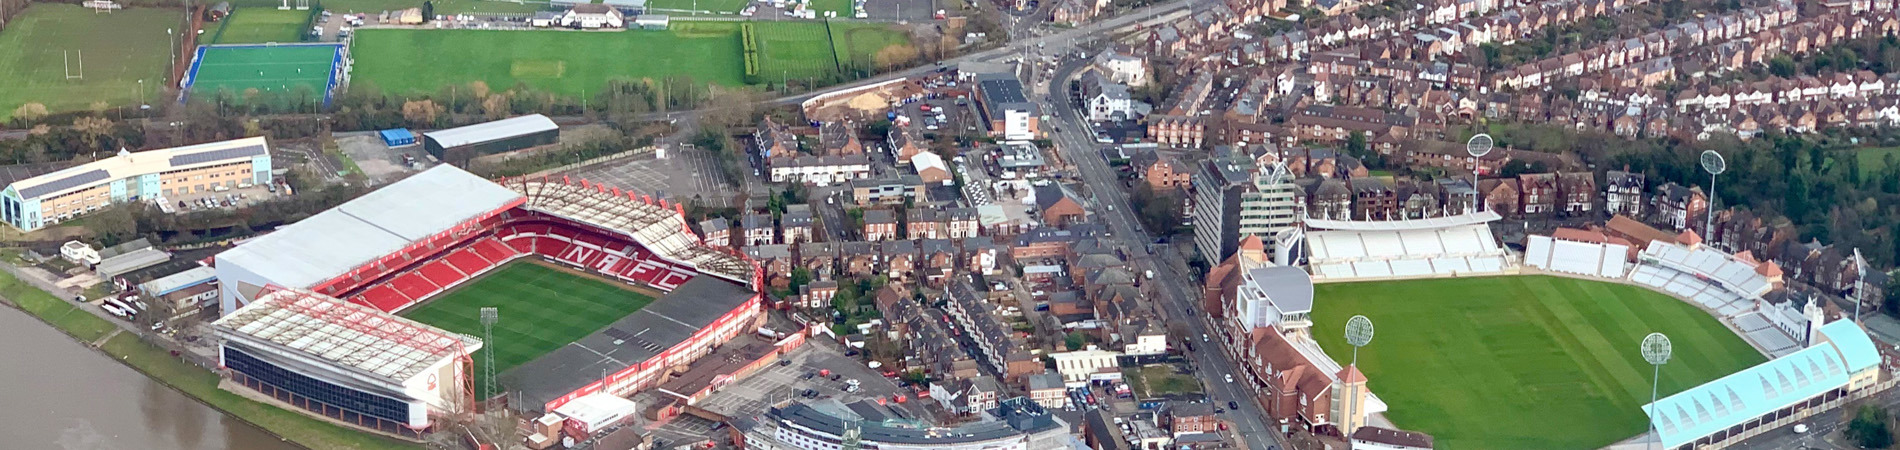 Aerial photo of  sports grounds in the Trent Bridge area